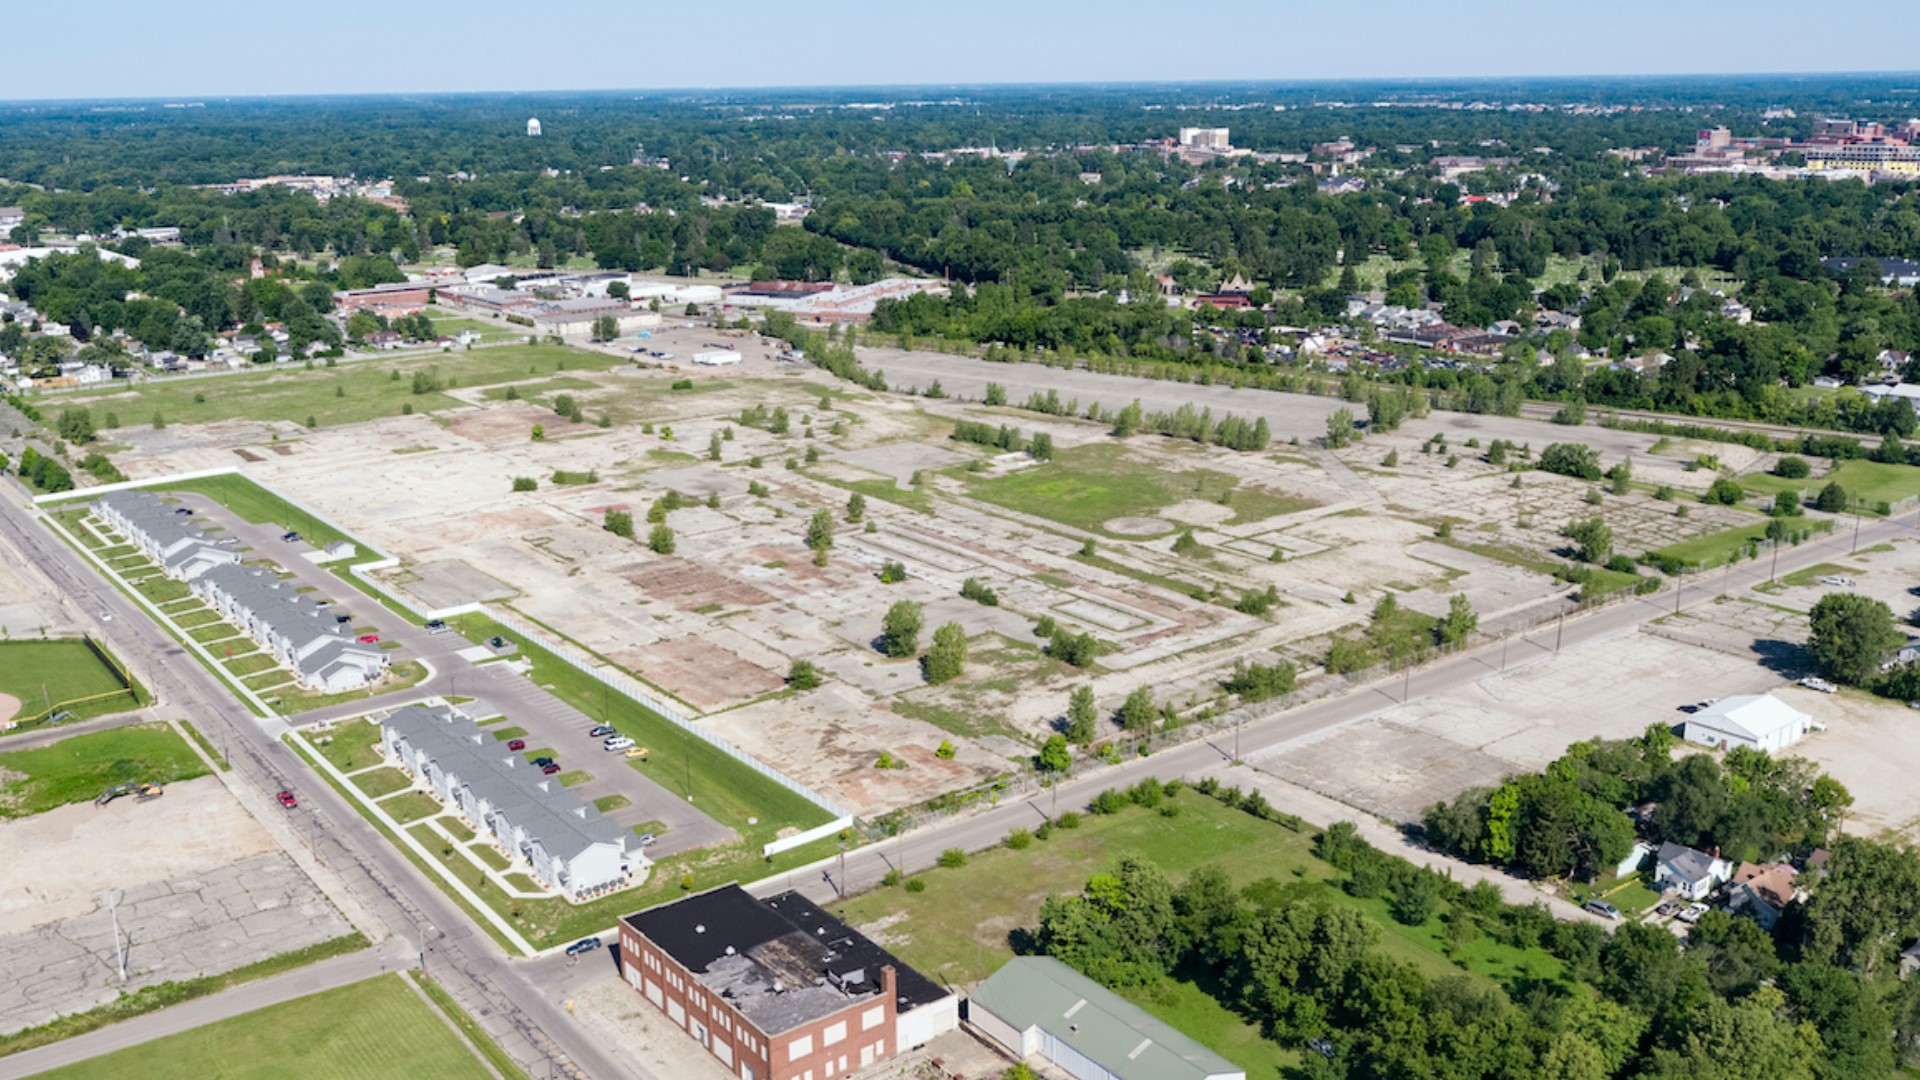 The deal with RACER Trust will give the city control of the 53-acre site at 1200 W. 8th St.